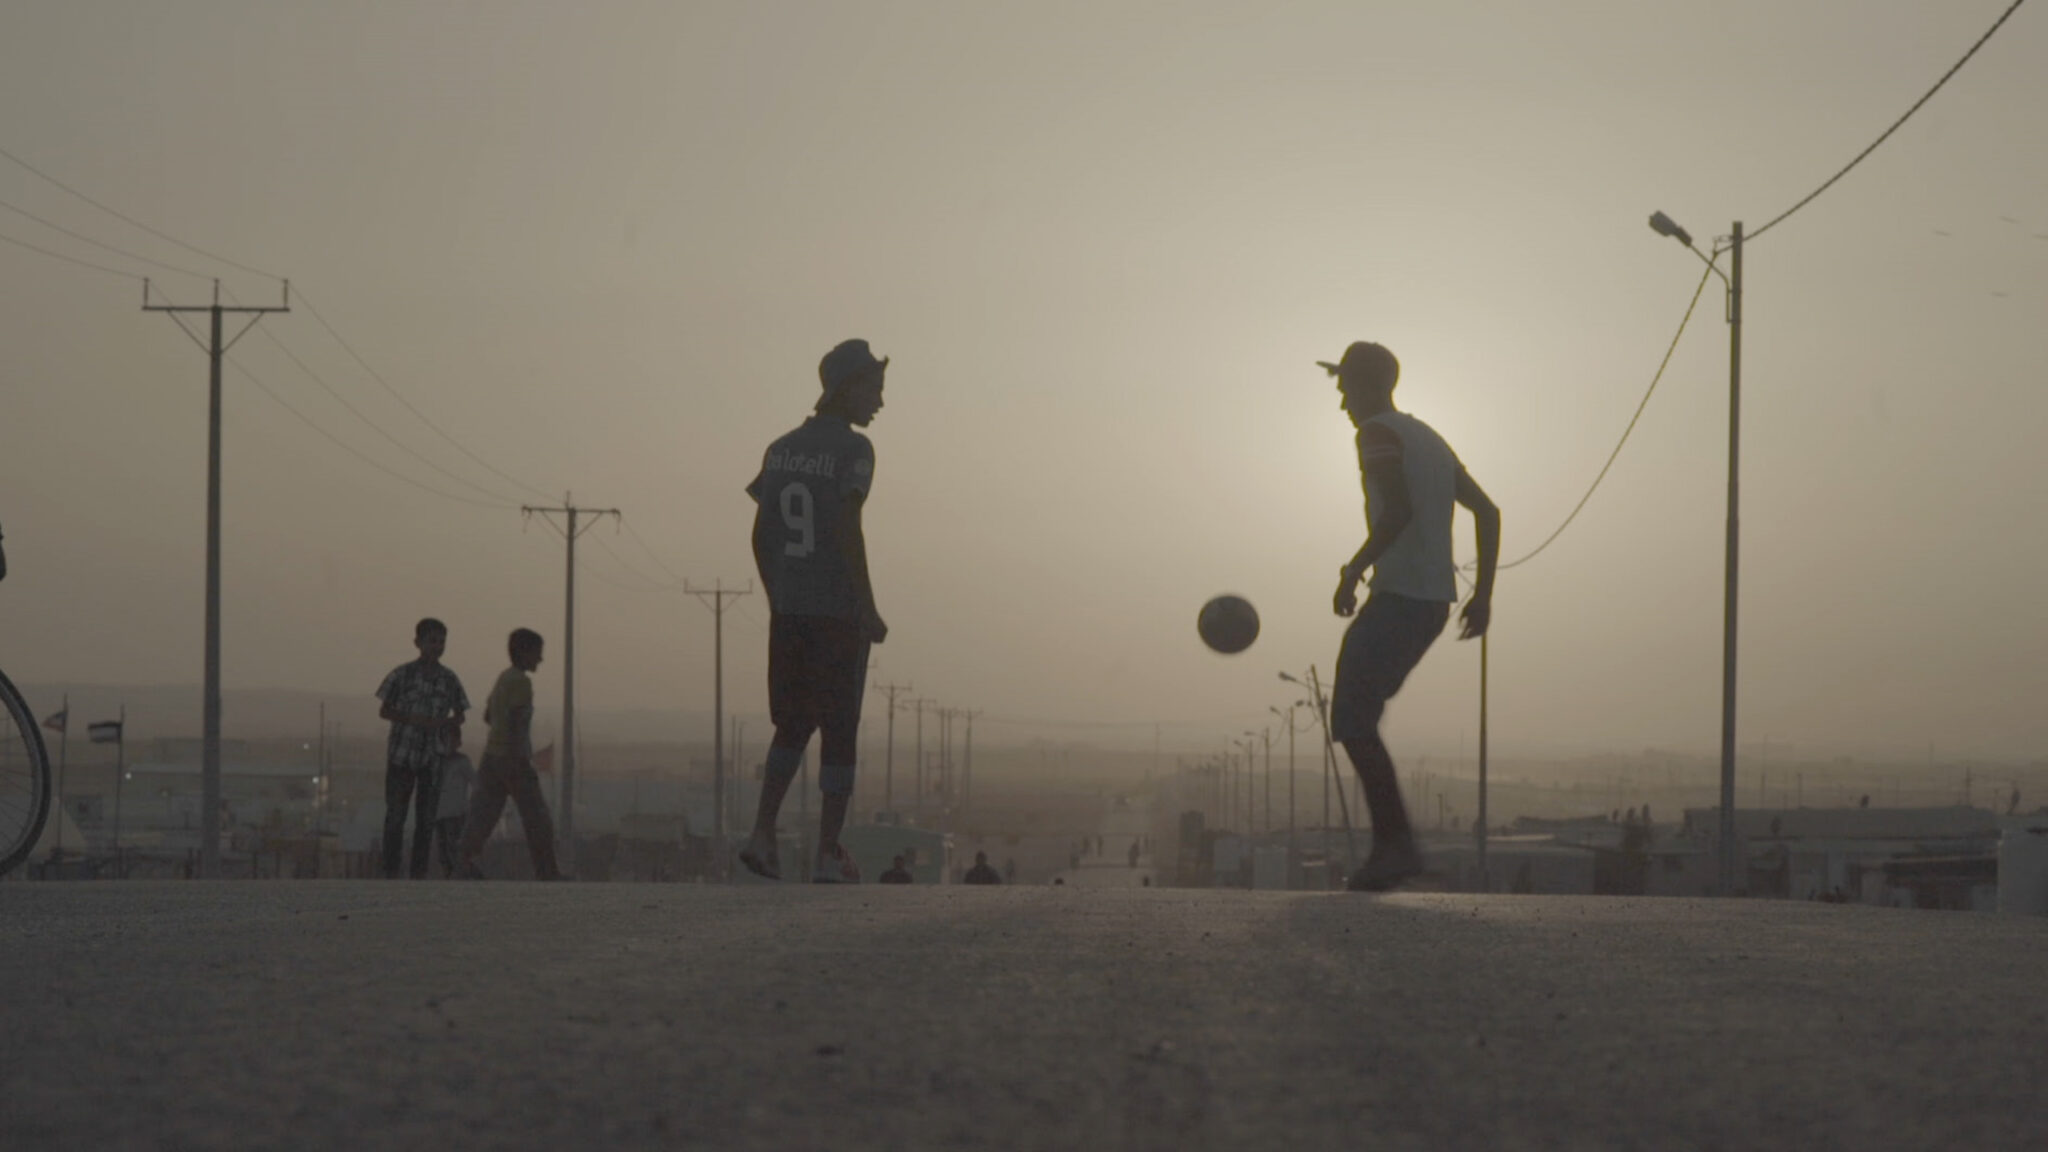 two men are playing soccer in the middle of the street, their bodies are in silhouette